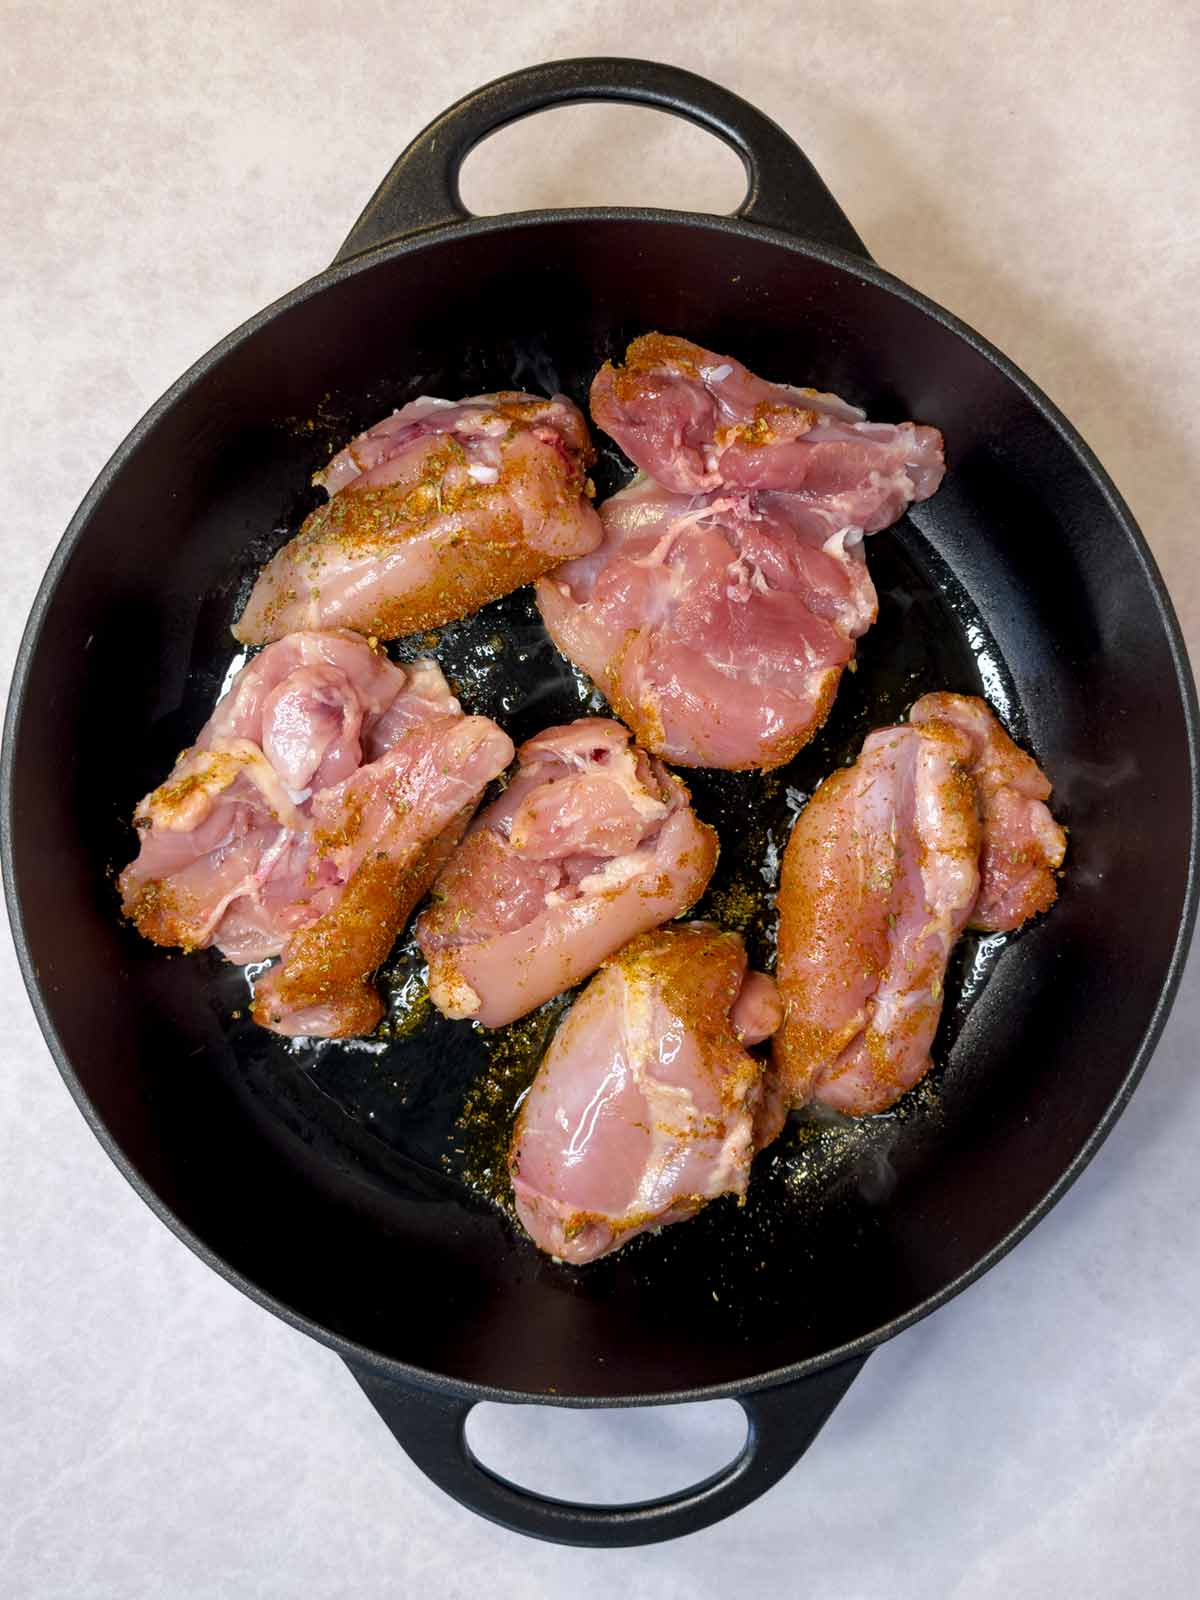 Chicken thighs cooking in a large black pan.